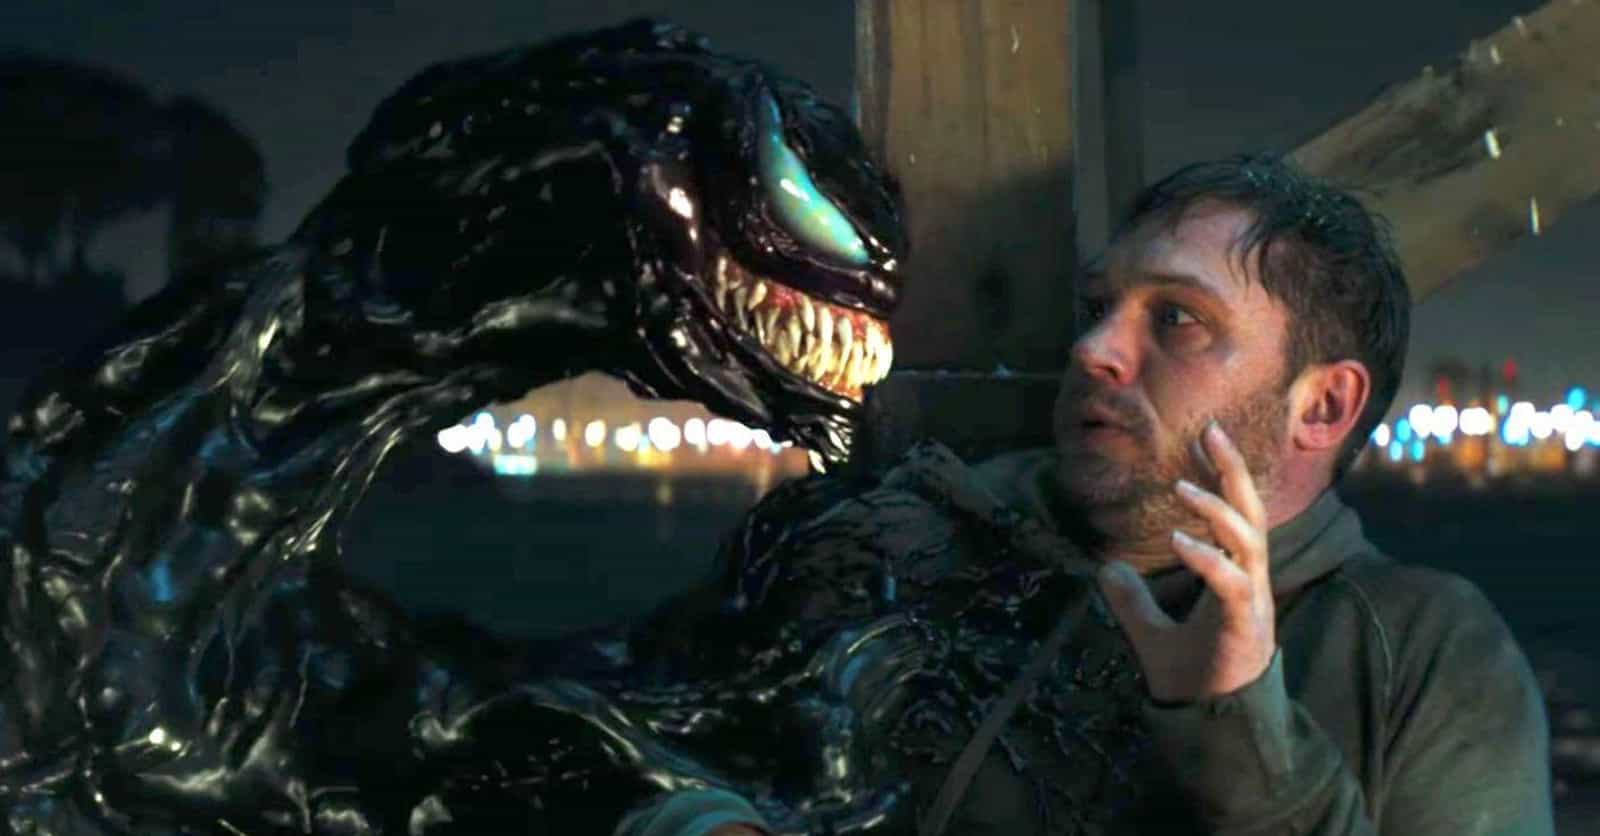 15 Fan Theories About Venom That Are Wild Enough To Be True